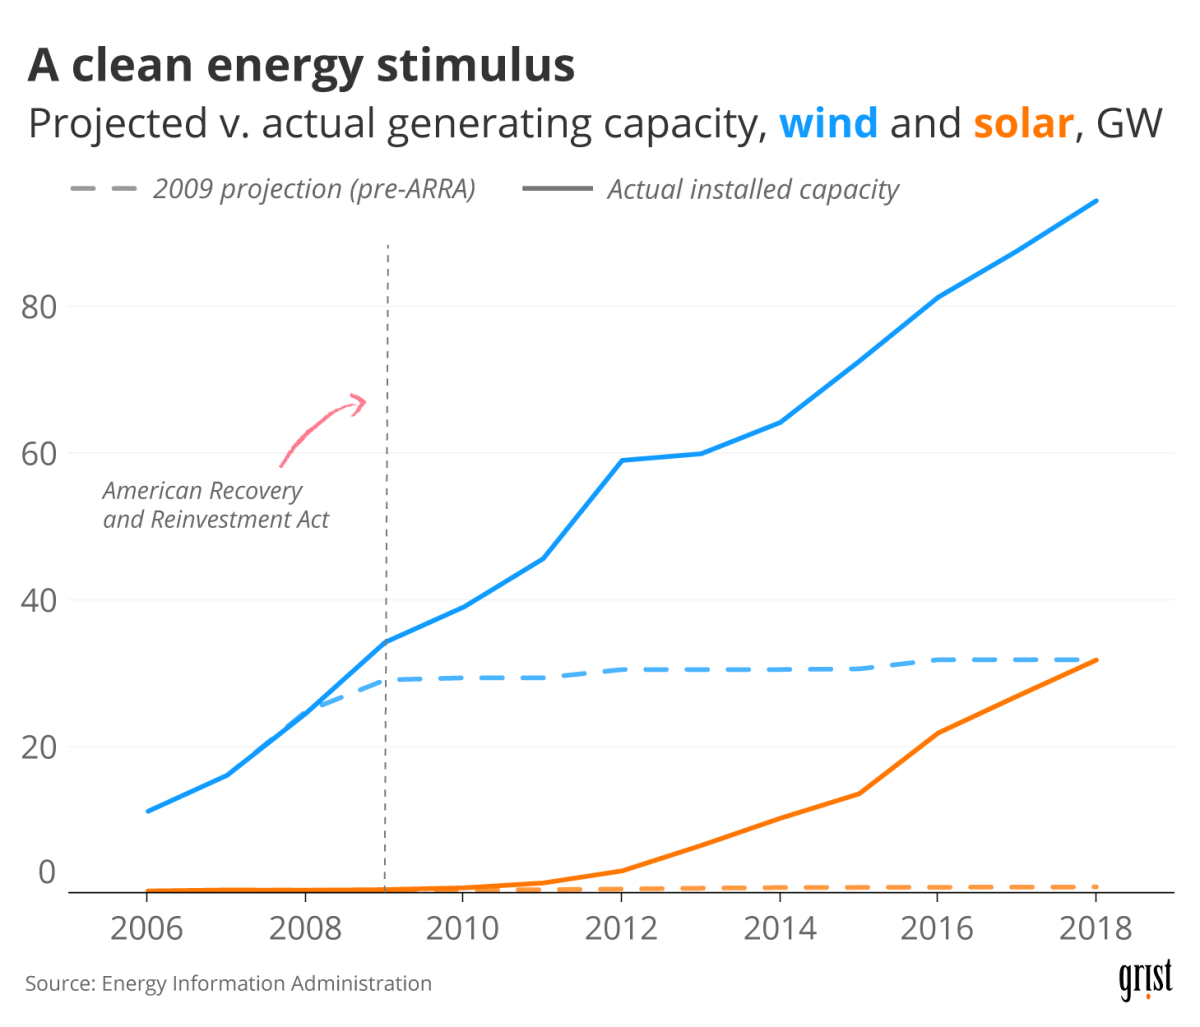 A line chart showing U.S. wind and solar generating capacity between 2006 and 2018, as well as capacity projections made in 2009 (before the American Recovery and Reinvestment Act). Actual capacity drastically outpaced the 2009 projections in the years that followed.